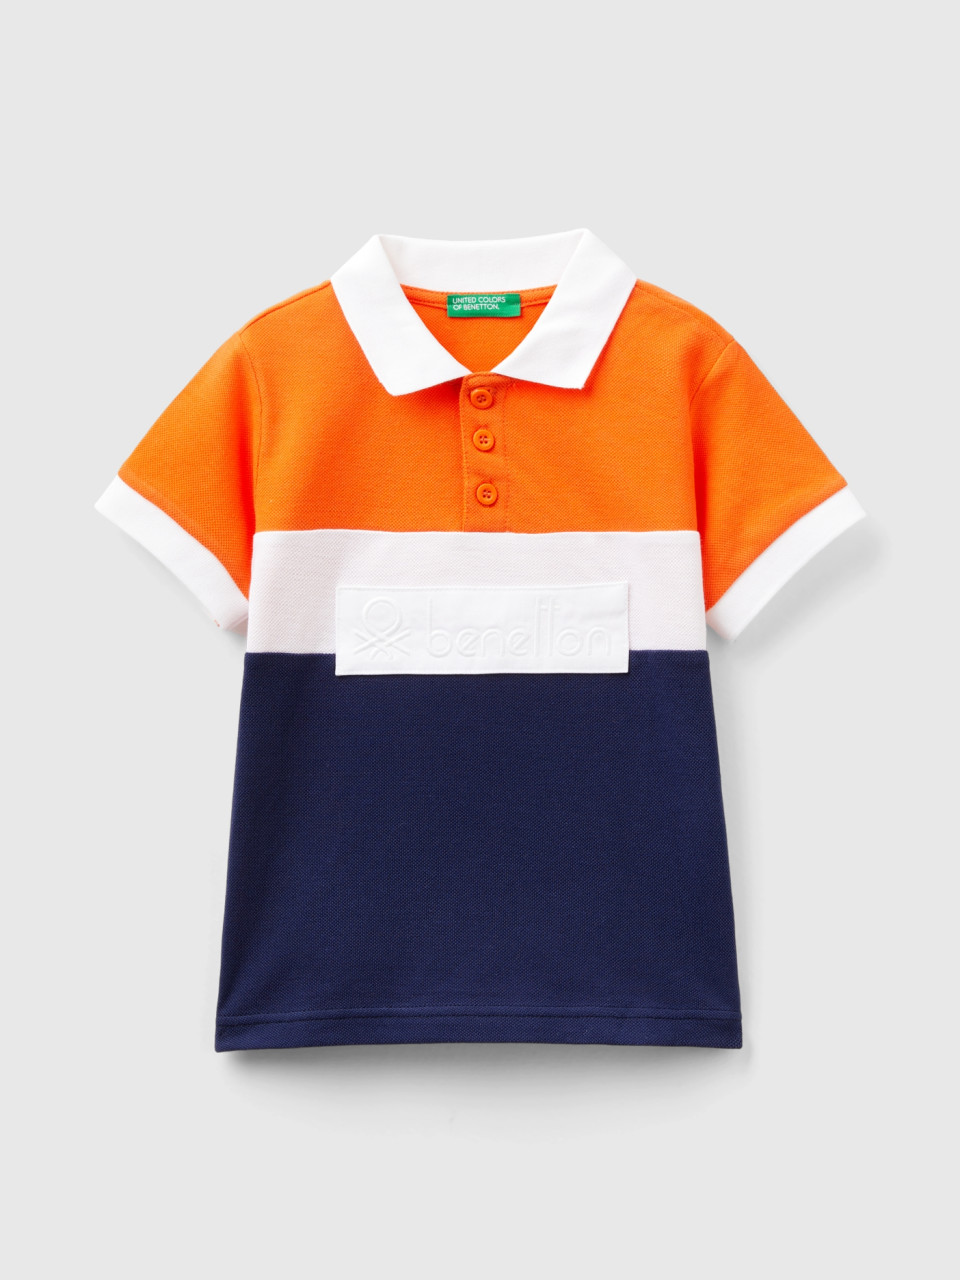 Benetton, Poloshirt In Color Block Mit Patch, Orange, male